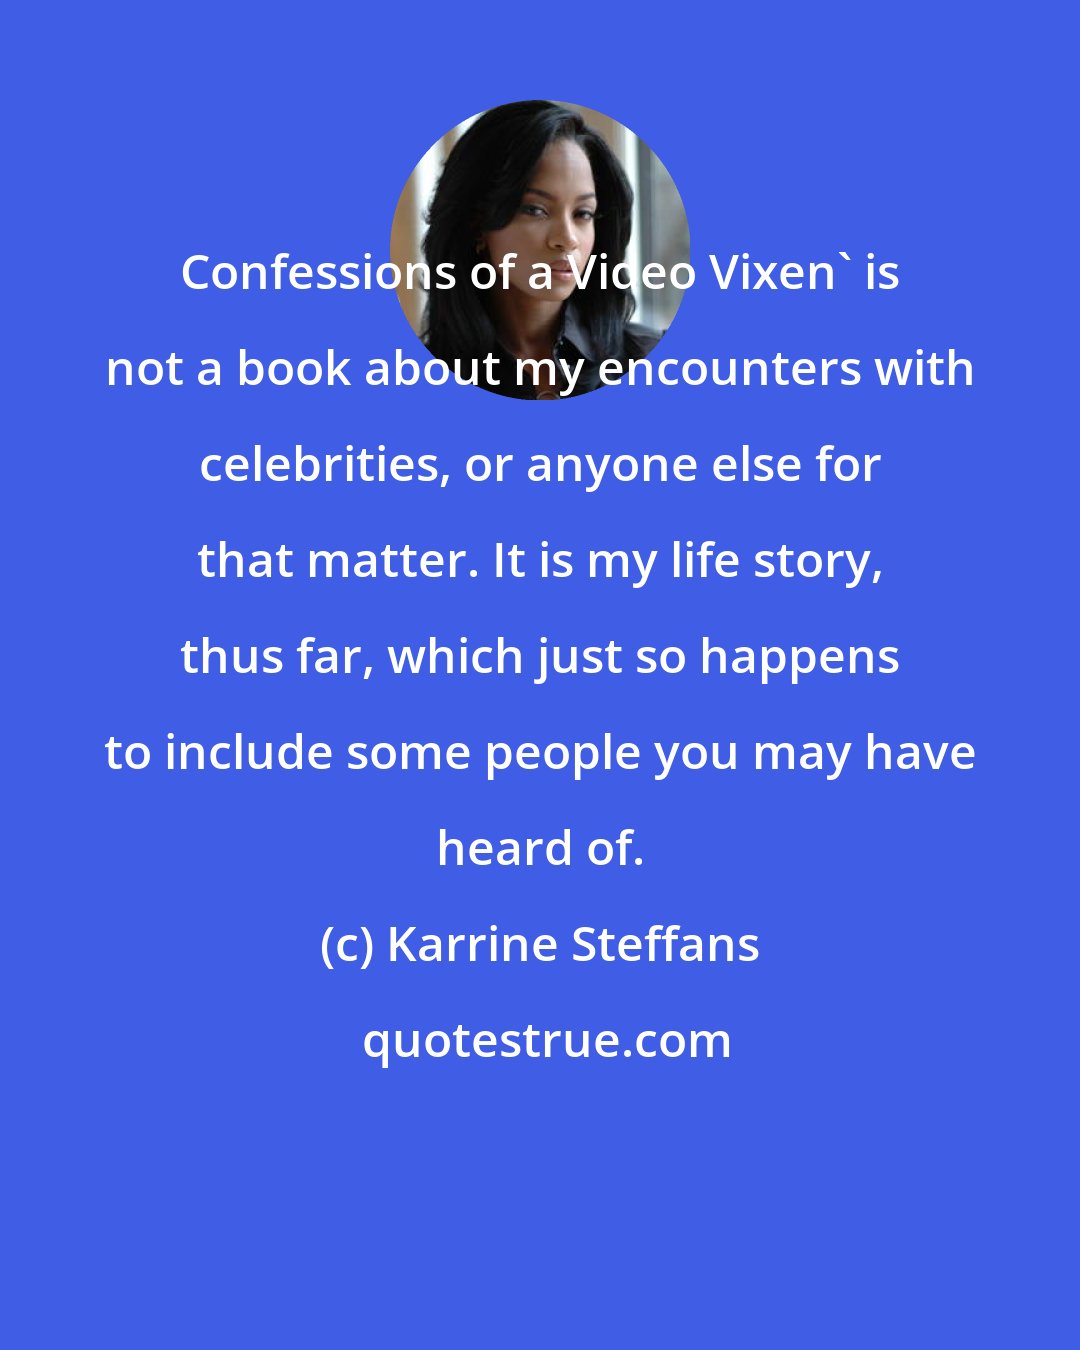 Karrine Steffans: Confessions of a Video Vixen' is not a book about my encounters with celebrities, or anyone else for that matter. It is my life story, thus far, which just so happens to include some people you may have heard of.